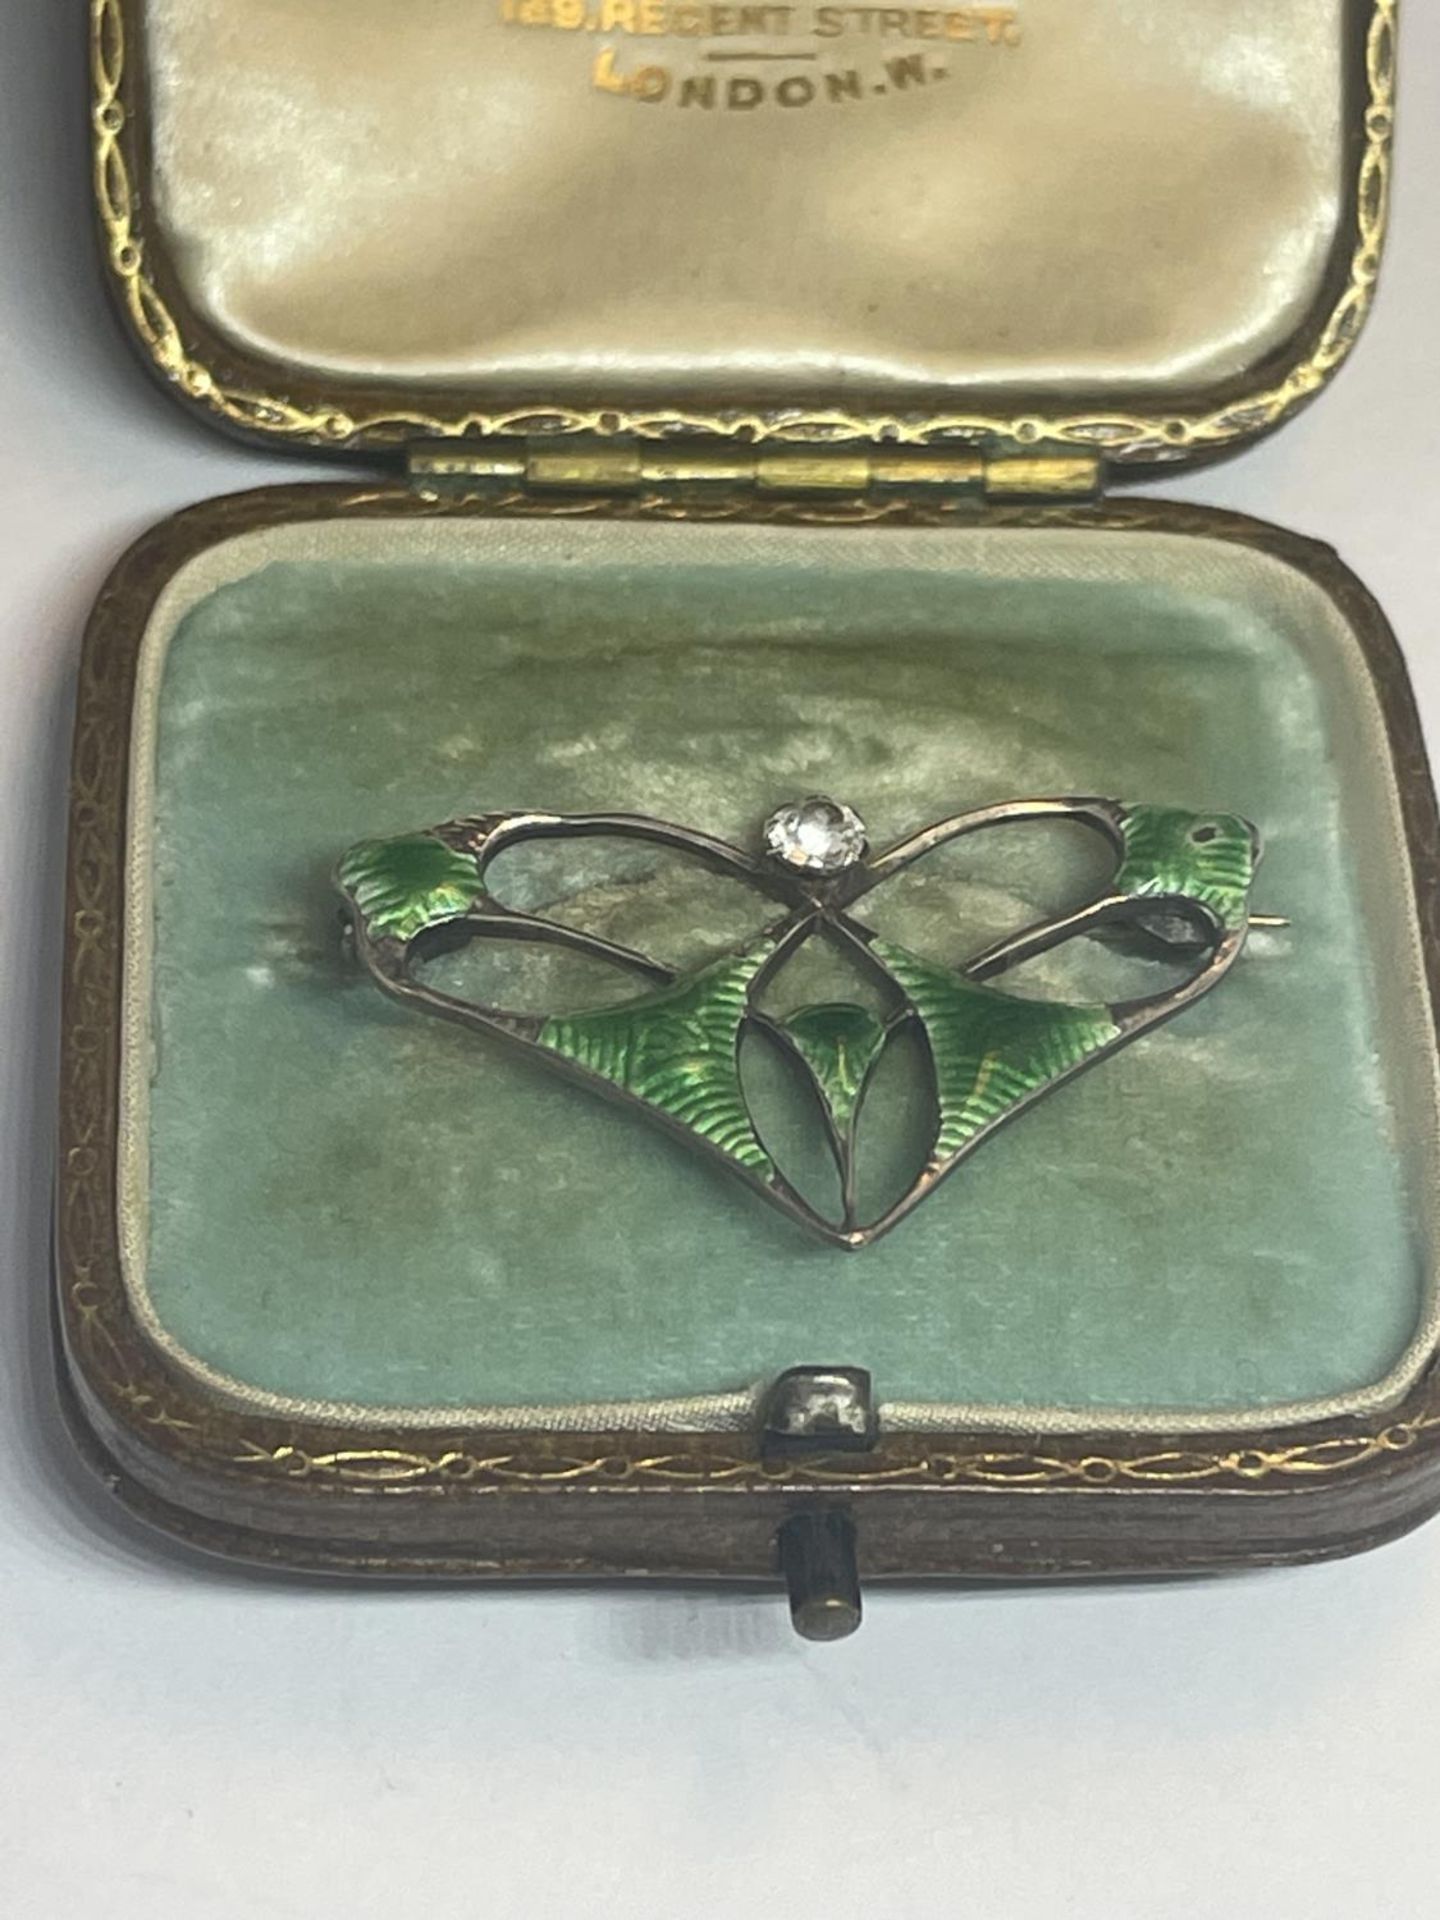 A CHARLES HORNER CHESTER SILVER AND ENAMELLED BROOCH IN A PRESENTATION BOX - Image 3 of 3